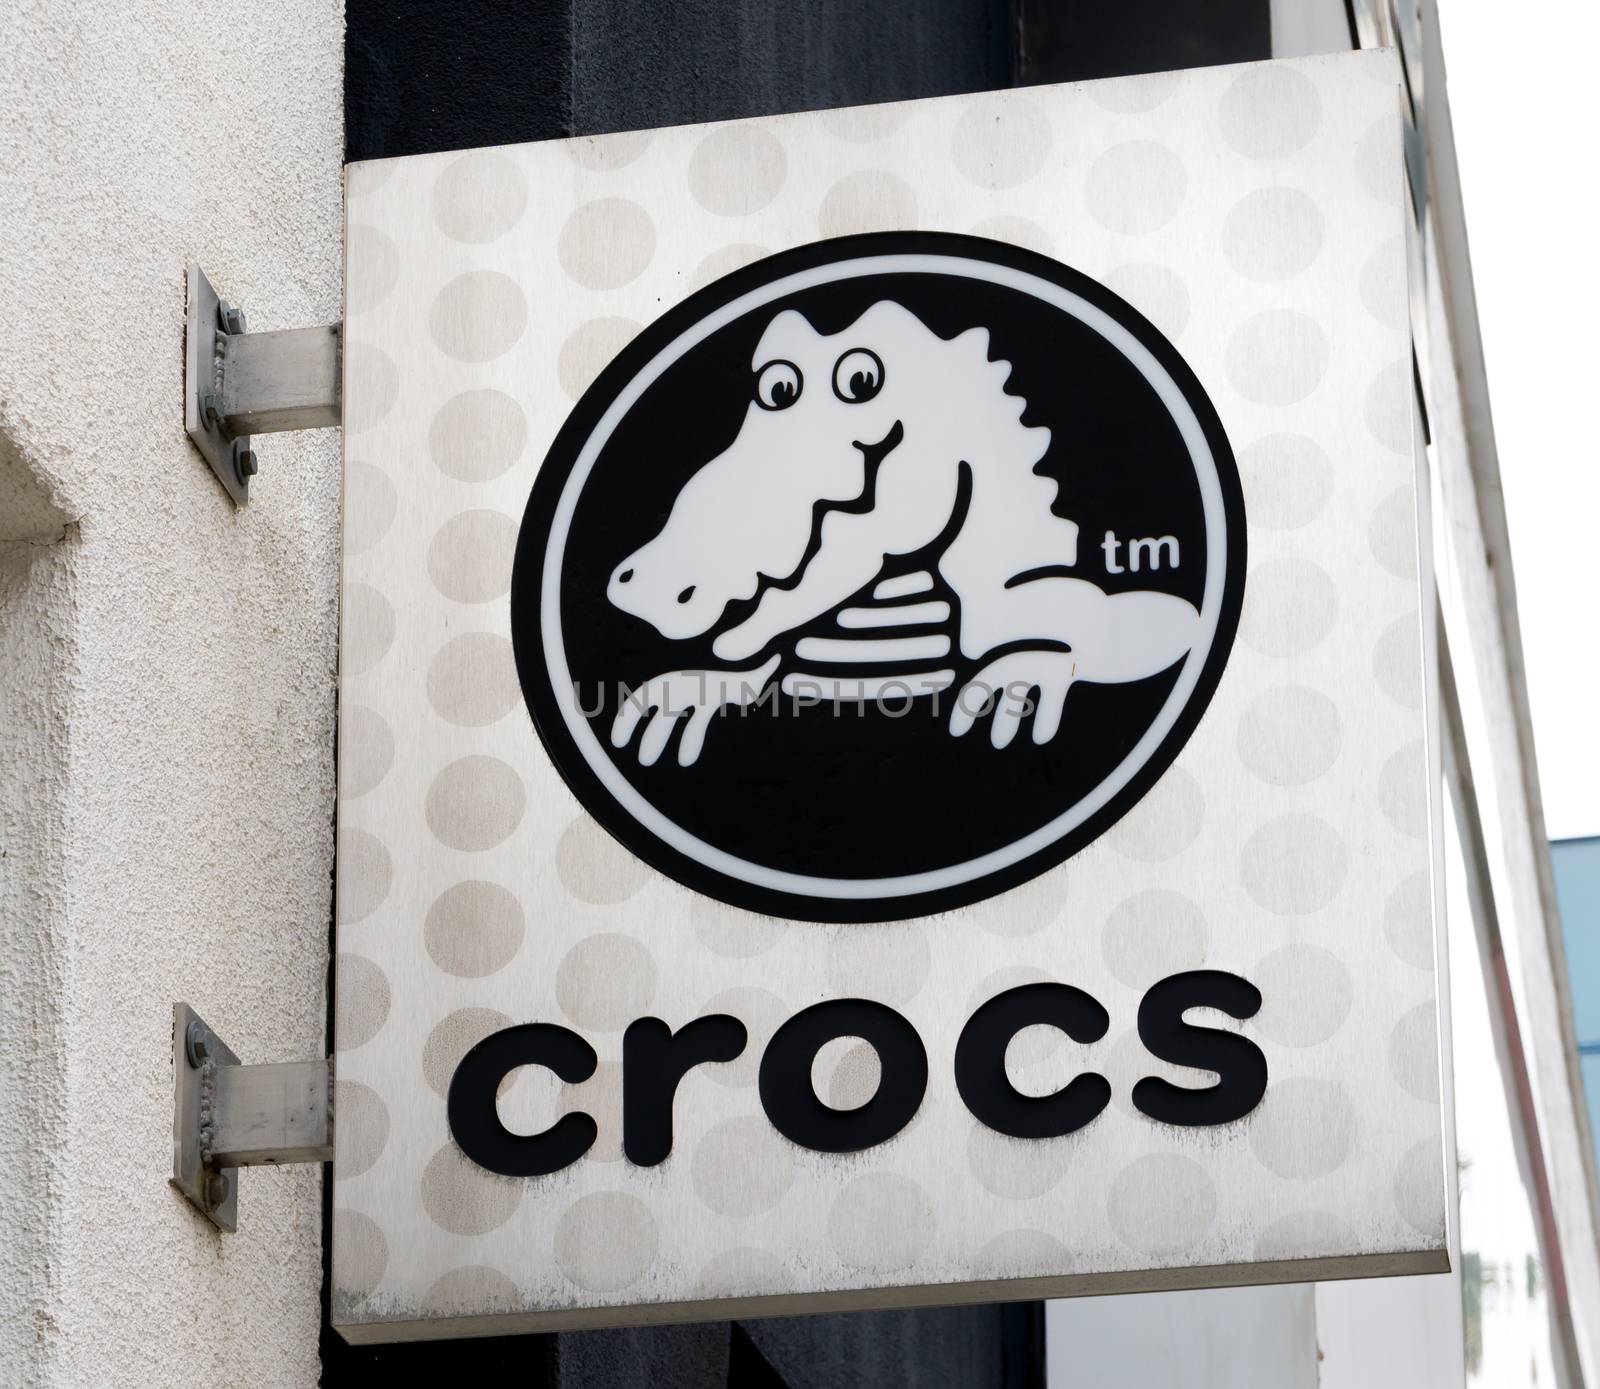 Crocs Exterior Sign and Logo by wolterk